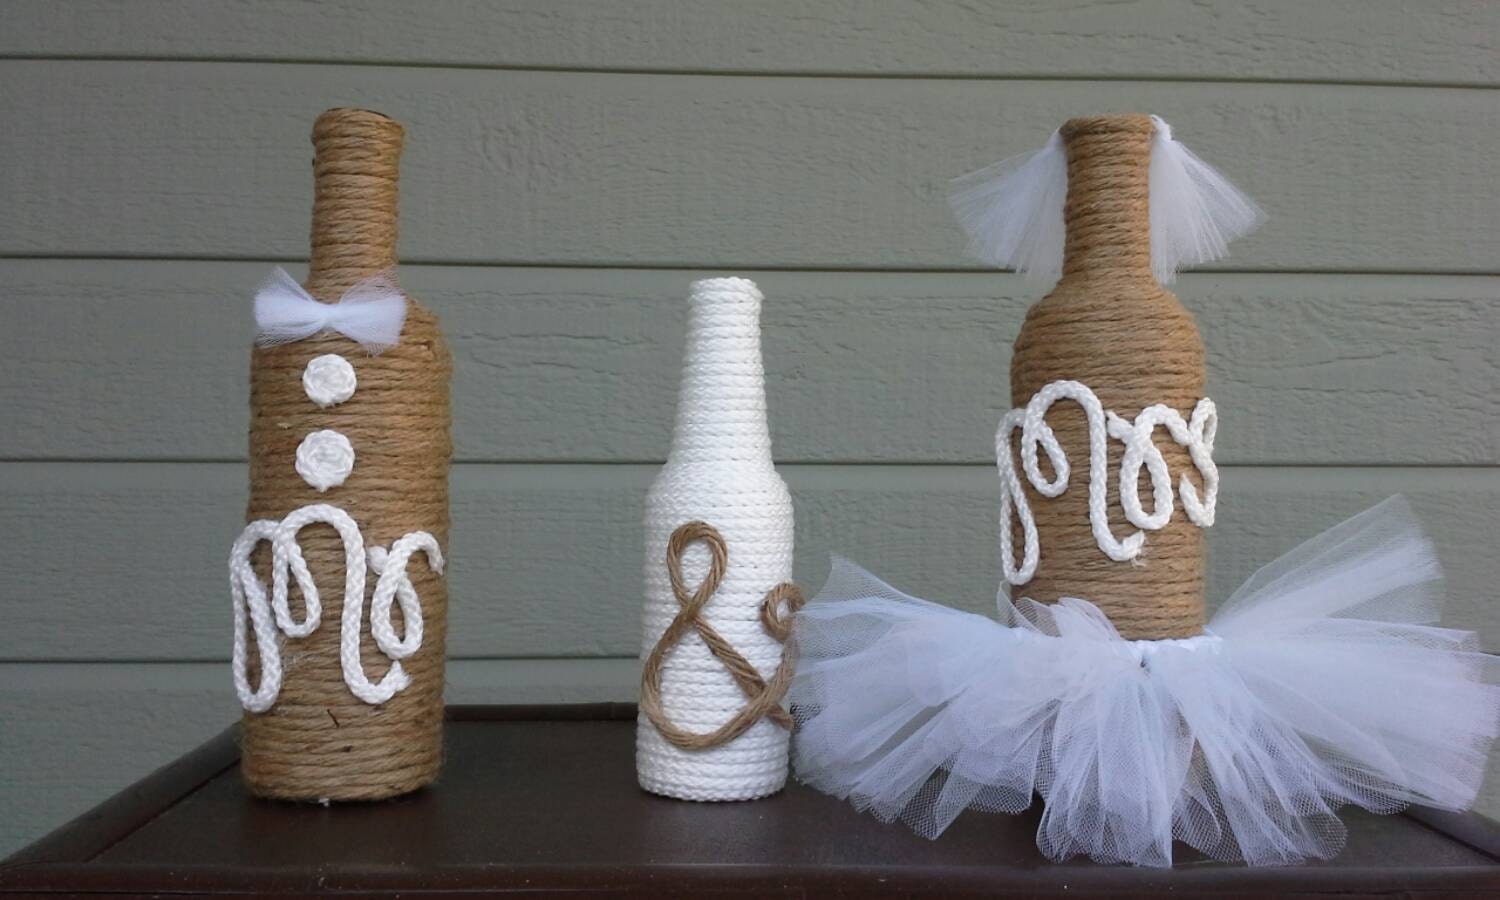 Mr. and Mrs. Wedding Bottle Decorations wrapped in jute and